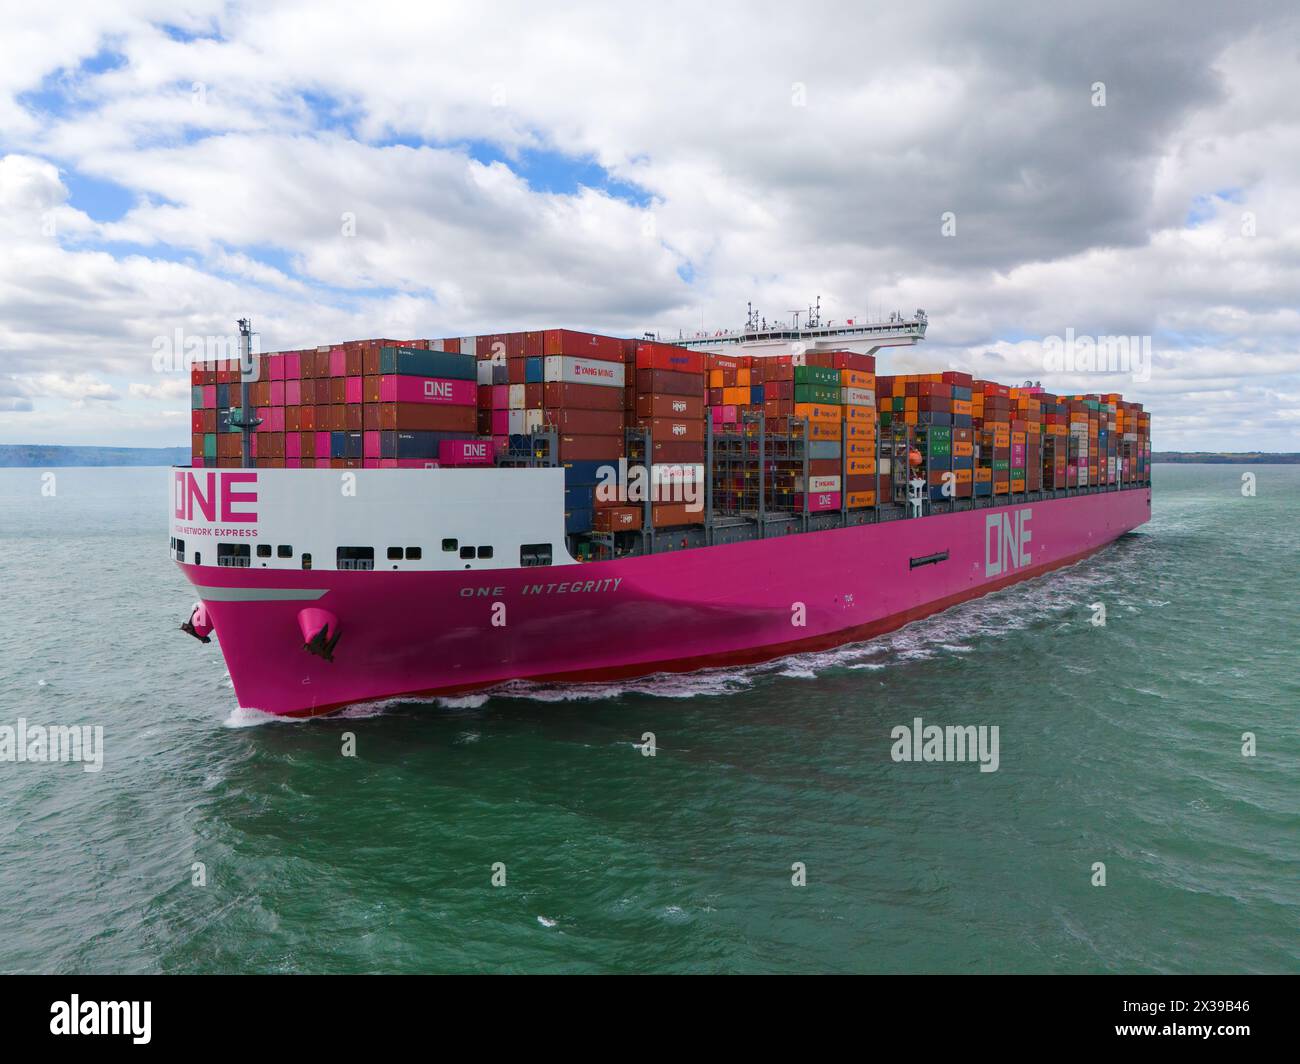 One Integrity is an Ultra-Large Container Carrier operated by Ocean Network Express between Asia and Europe. Stock Photo